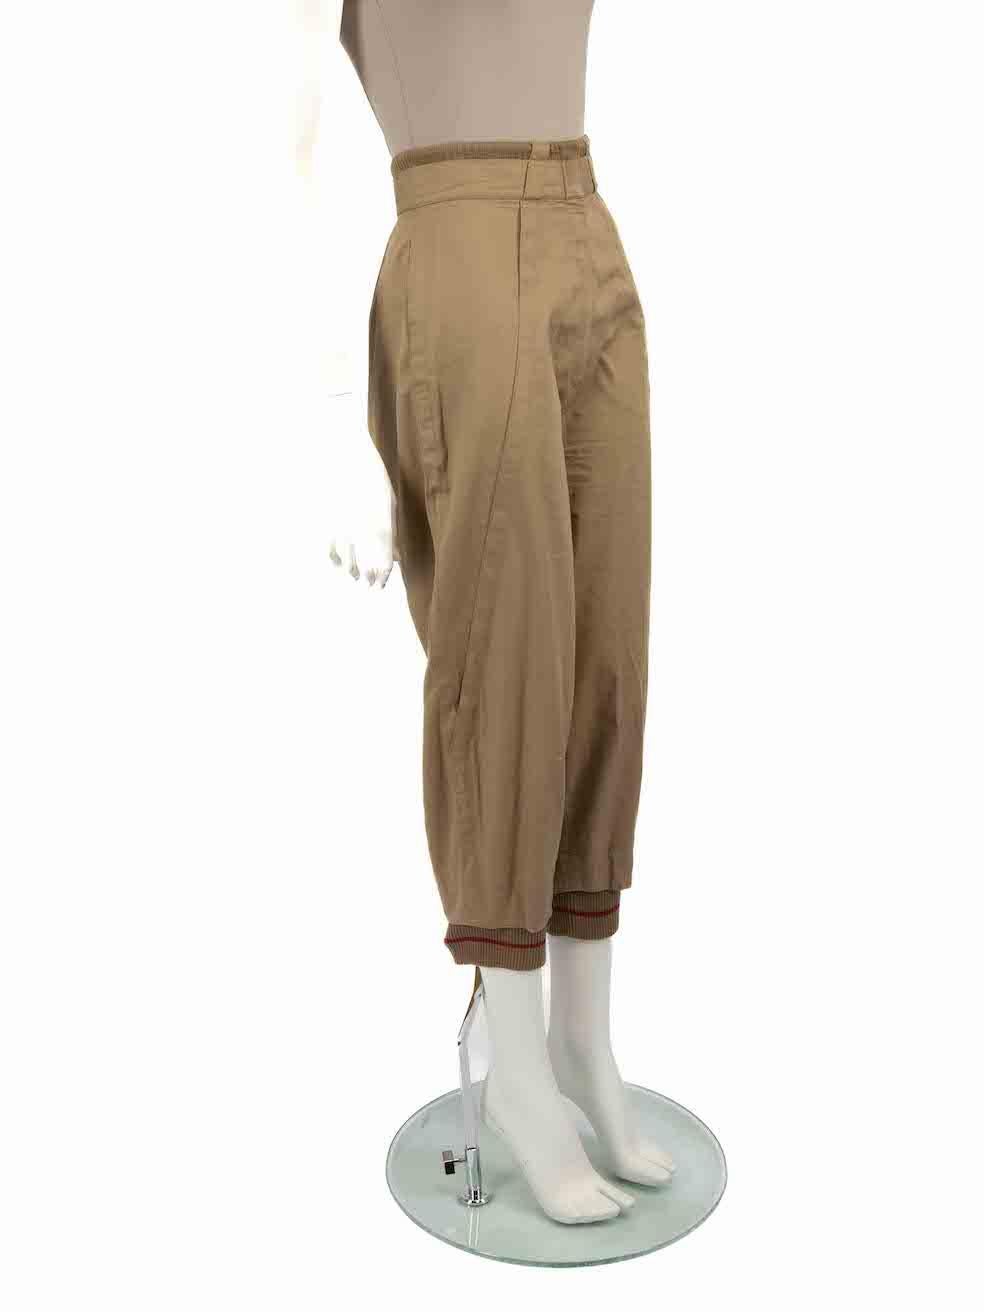 CONDITION is Very good. Minimal wear to trousers is evident. Minimal wear to waistband where there are minor plucks to the weave and a small mark to the right leg back on this used Versace designer resale item.
 
 
 
 Details
 
 
 Brown
 
 Cotton
 
